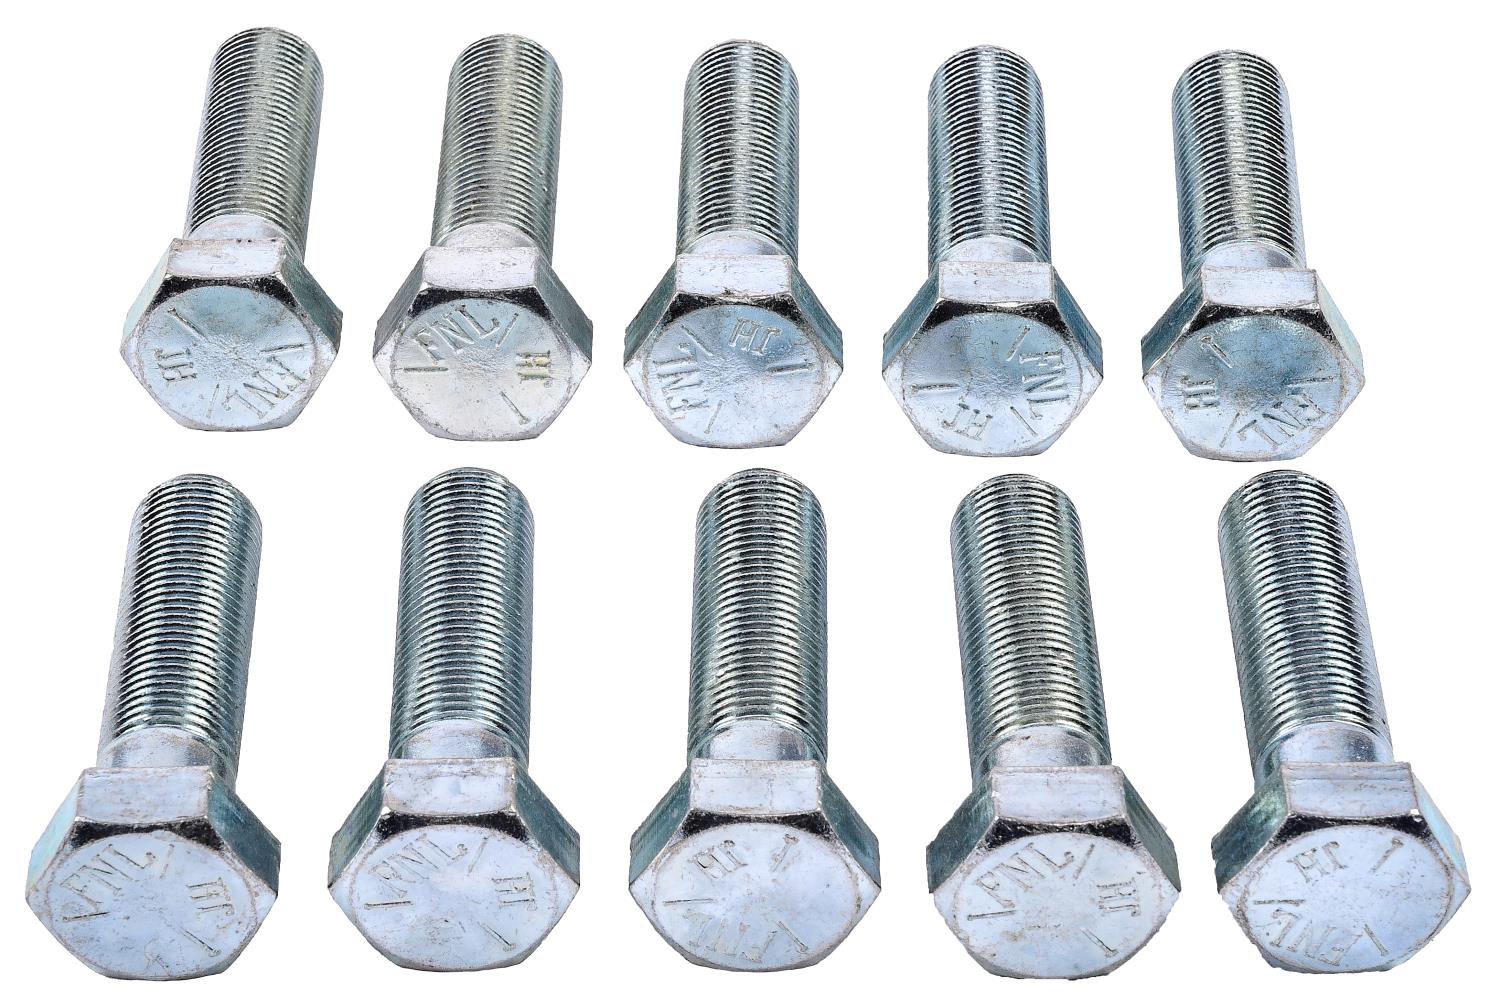 Hex Head Bolts, 5/8 in.-18 x 2 1/4 in. UHL, Carbon Steel, Grade 5 [Set of 10]